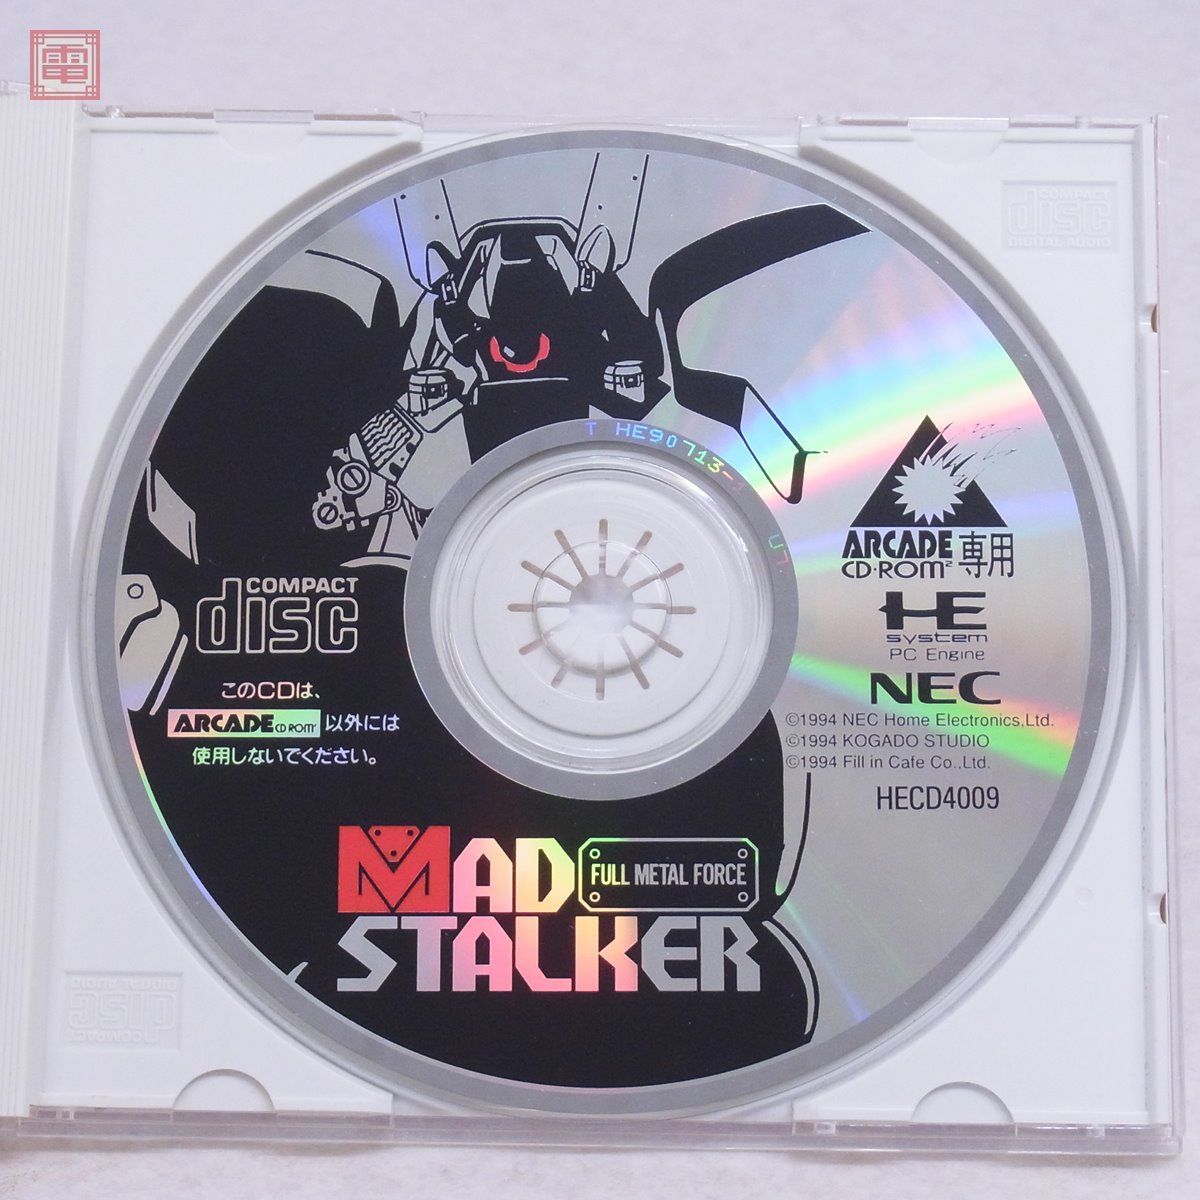 PCE PCエンジン ARCADE CD-ROM2 FULL METAL FORCE マッドストーカー MAD STALKER NEC 工画堂 KOGADO Fill in Cafe 箱説帯付【10の画像3